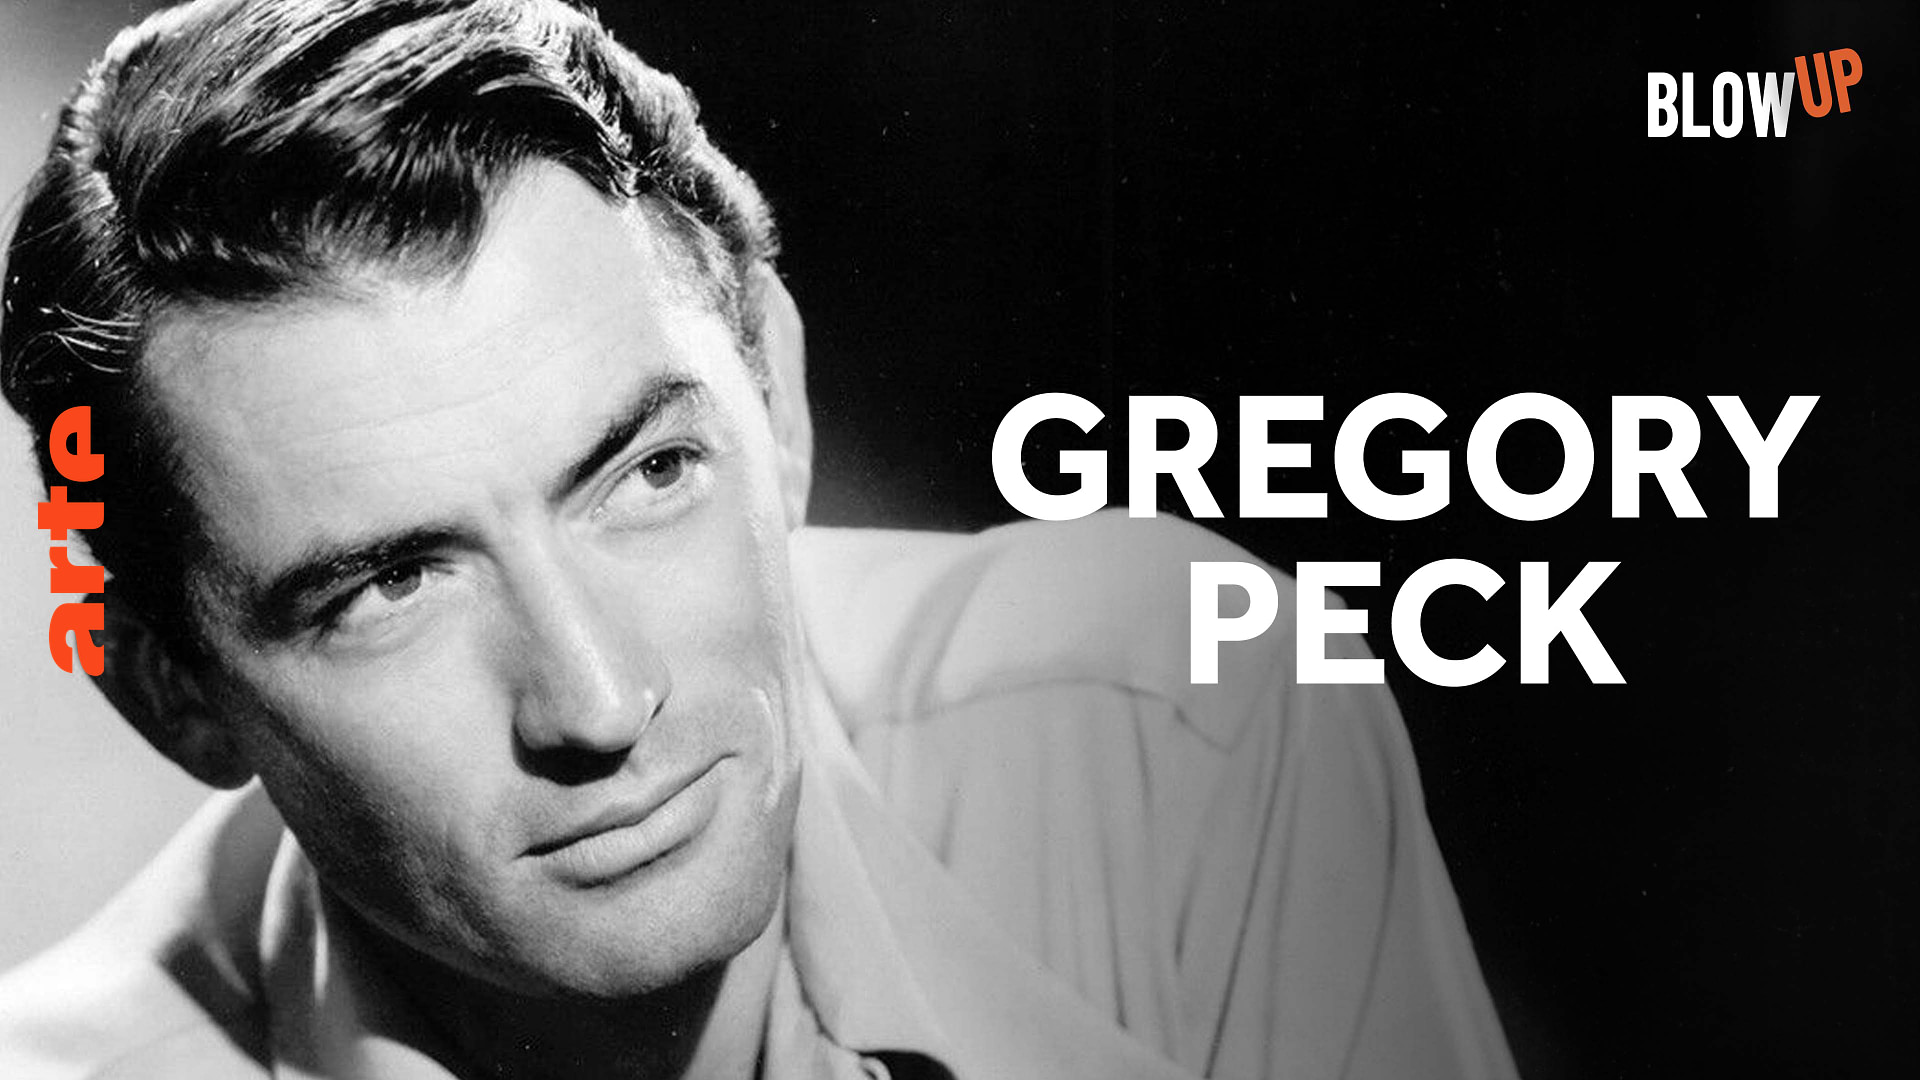 Blow up - Worum ging's bei Gregory Peck?